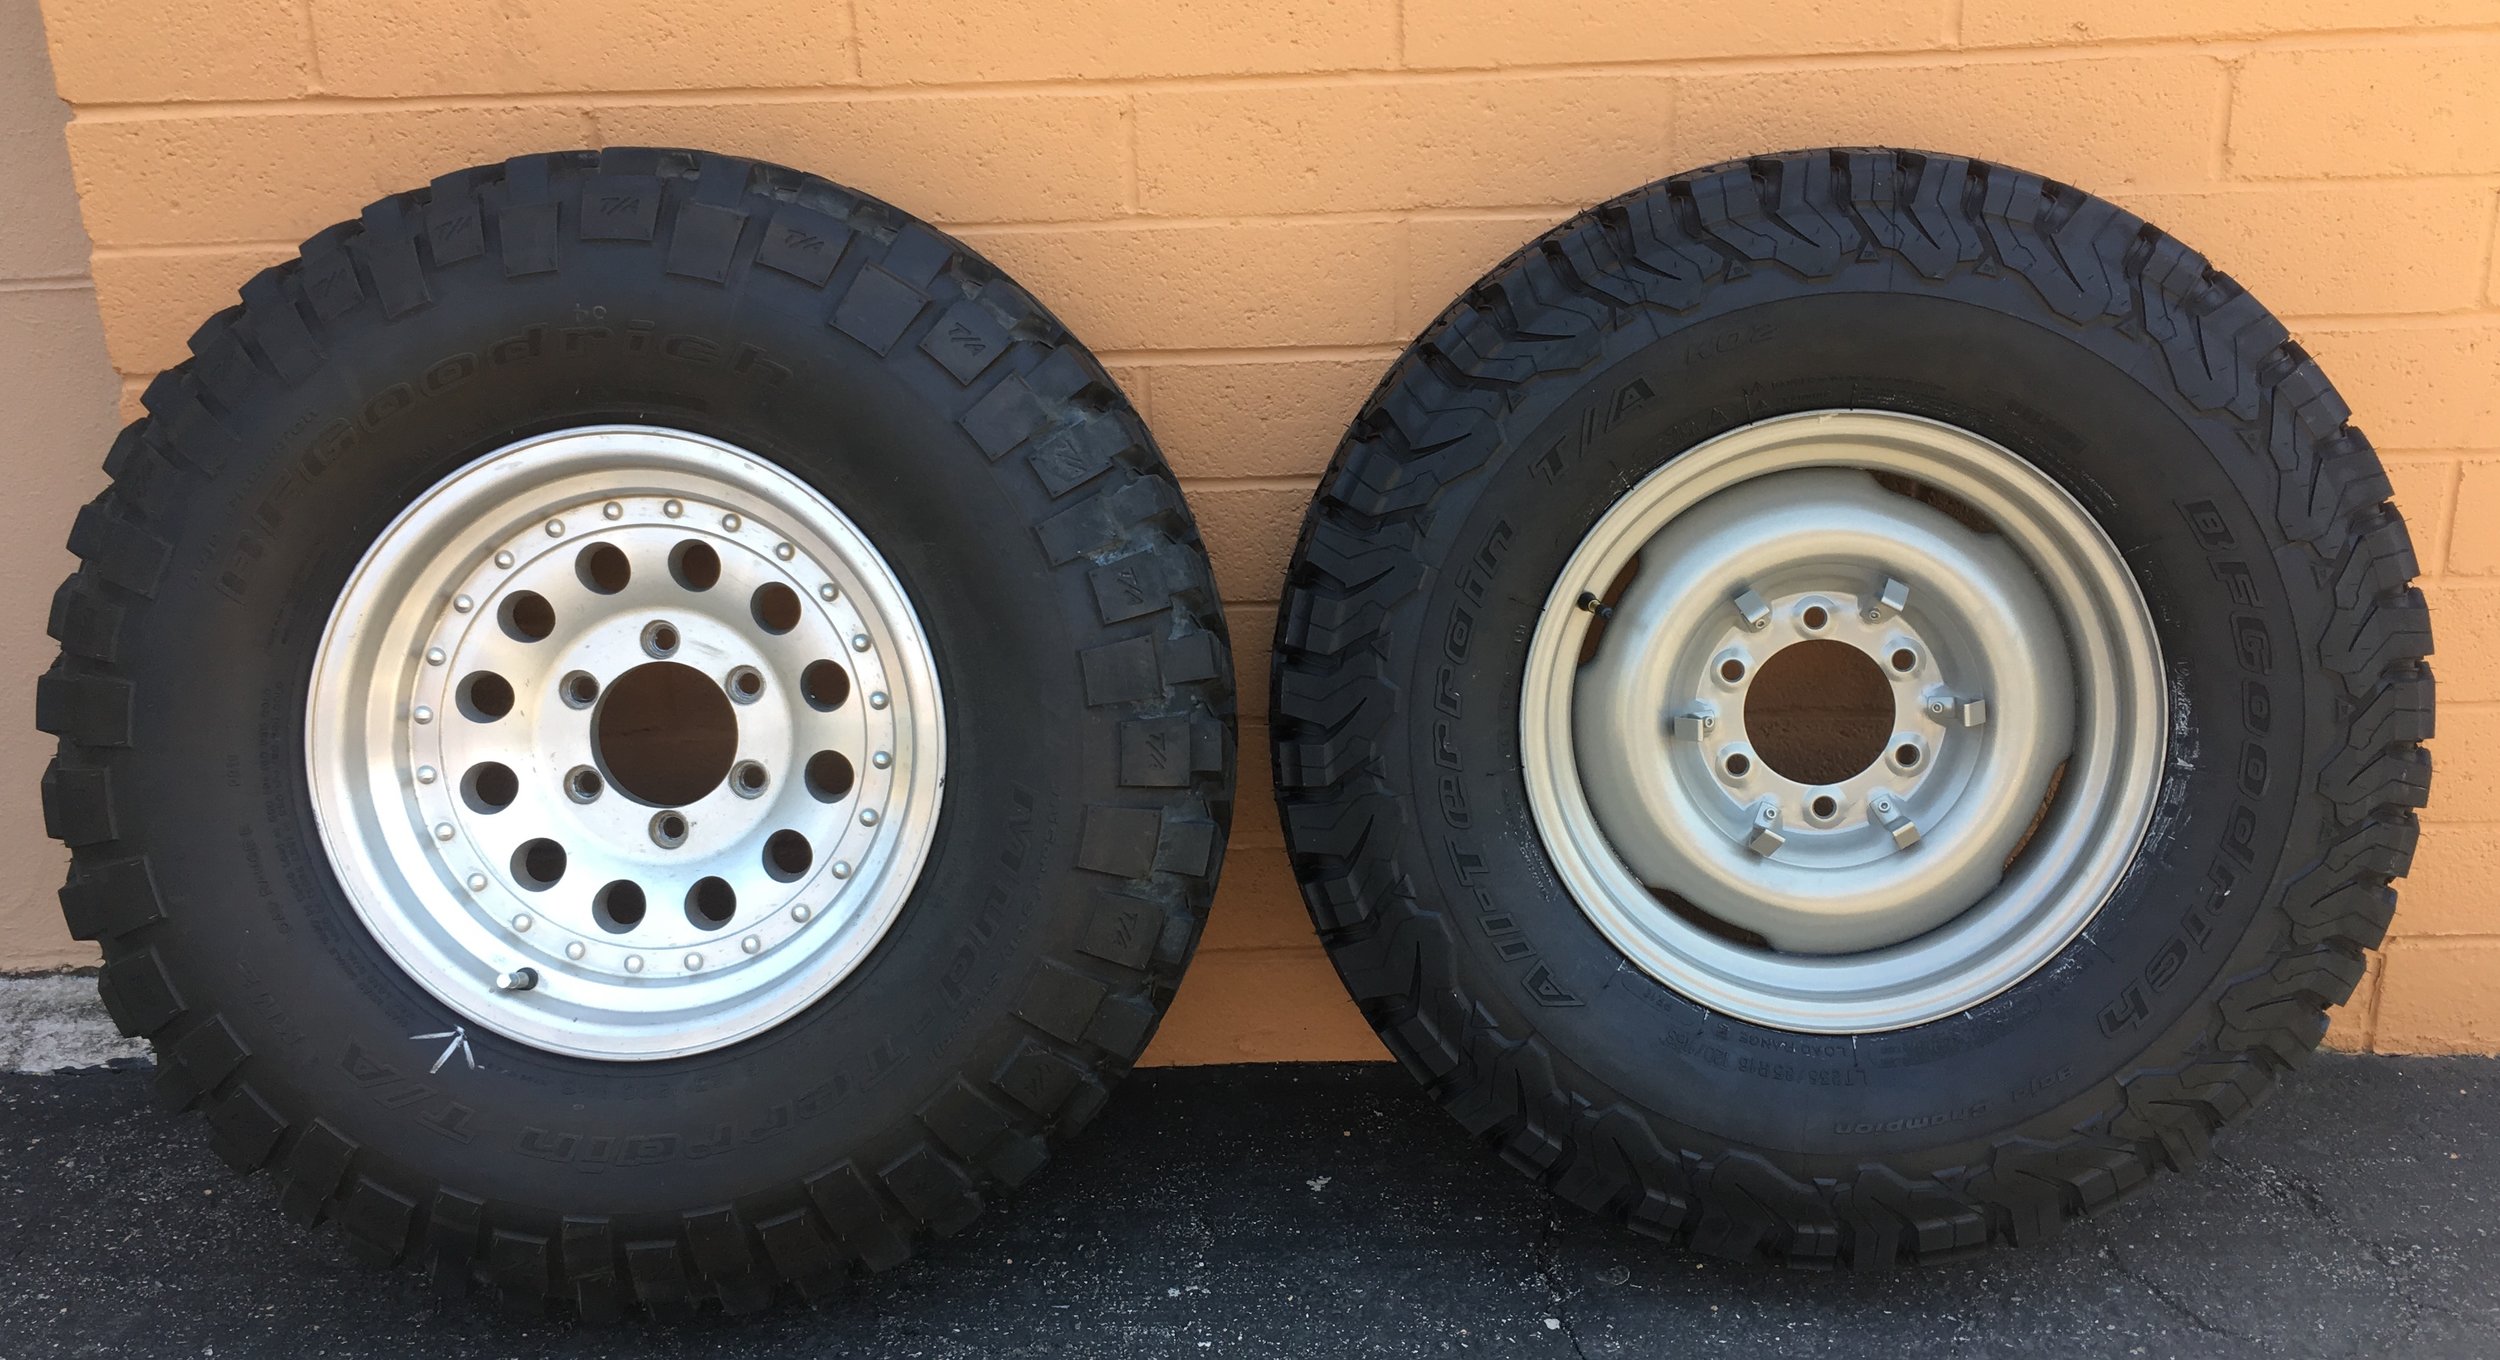 The Holy Grail Of Fj40 Wheels And Tires Exploring Overland